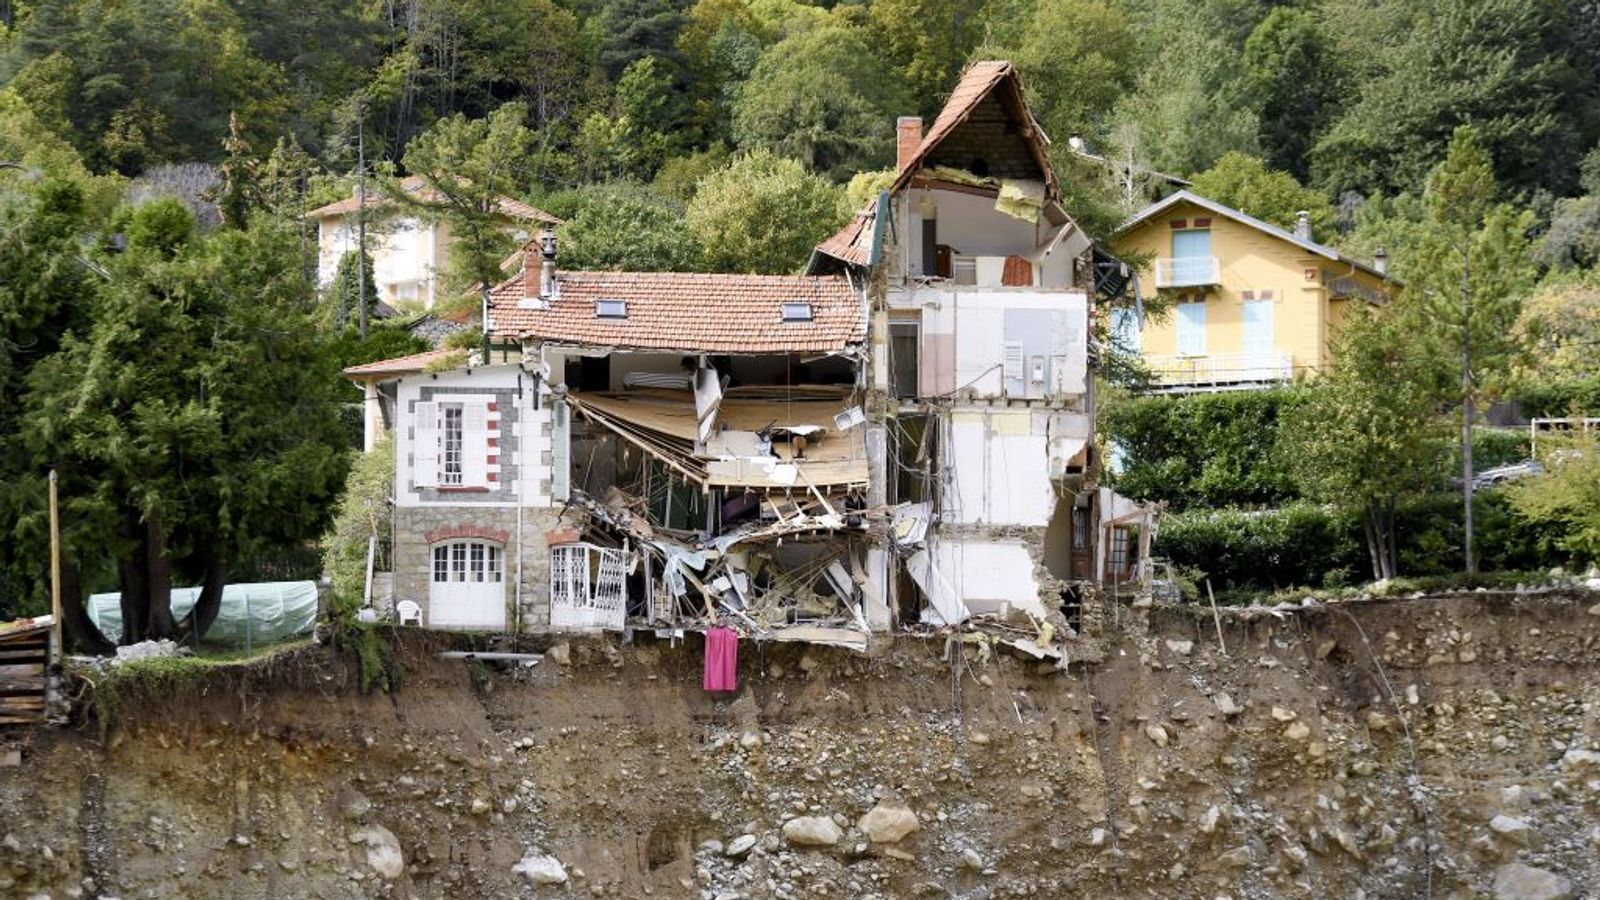 A house destroyed by a landslide on the banks of the Vesubie river 